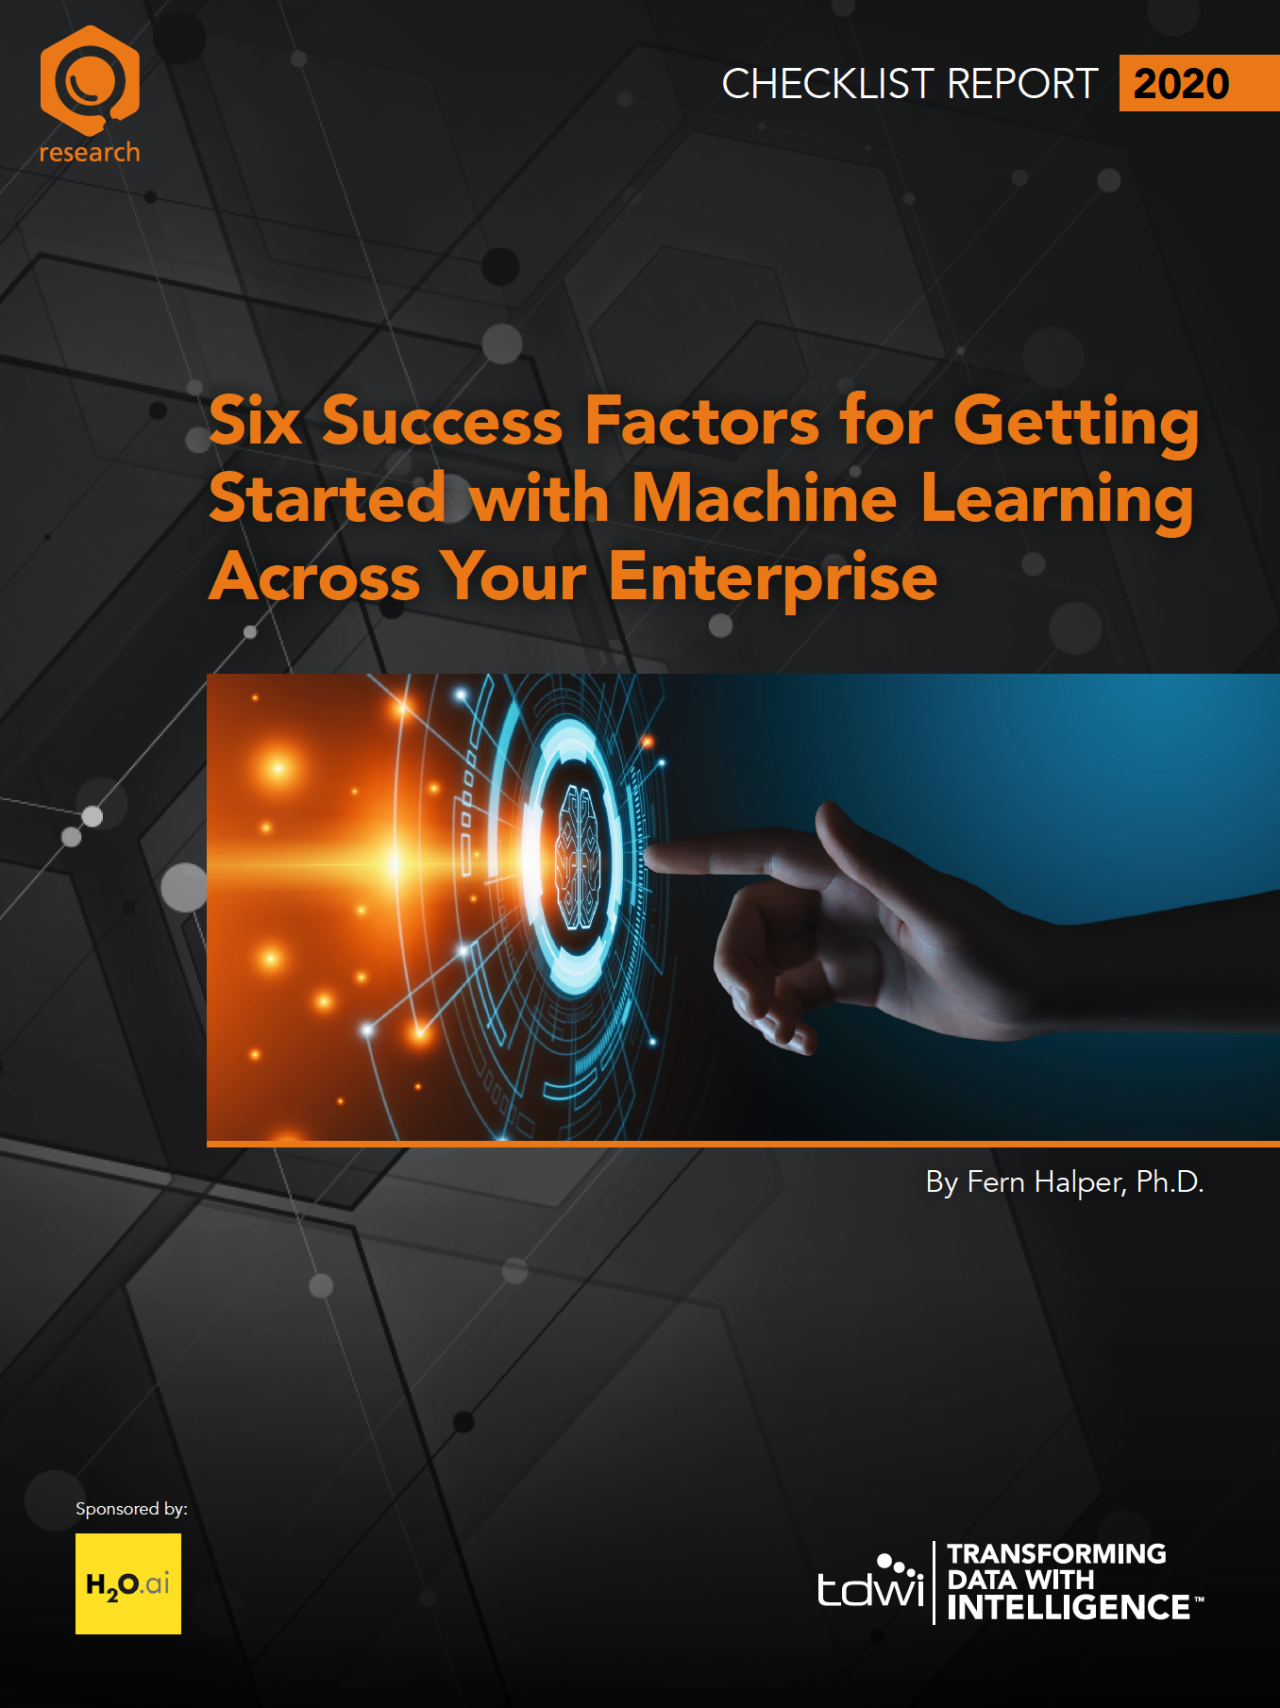 PDF image for 6 success factors for getting started with enterprise-wide machine learning